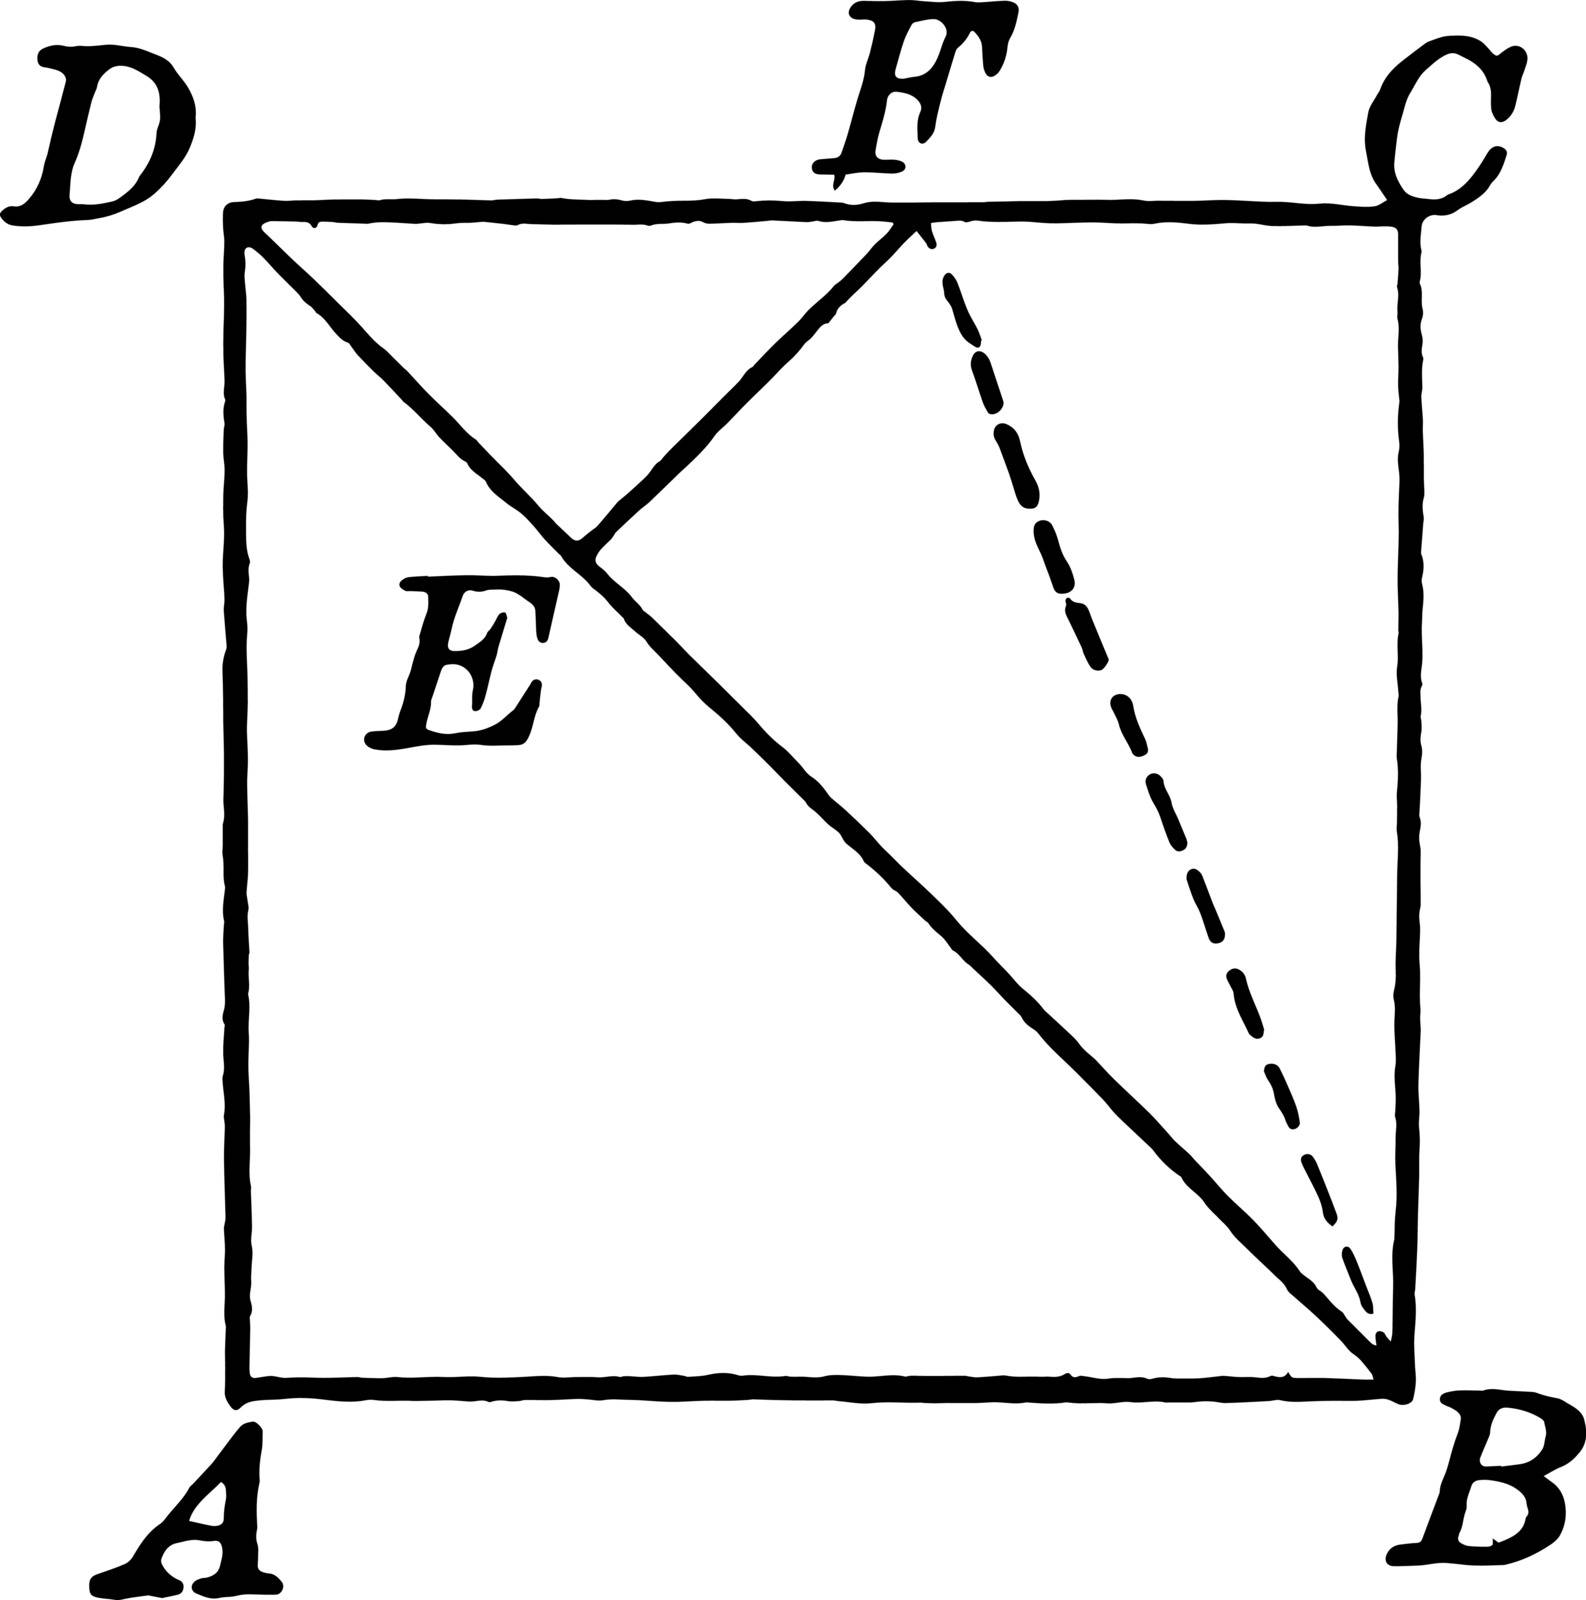 An image that shows a square. This square divided into two equal parts with a diagonal, vintage line drawing or engraving illustration.